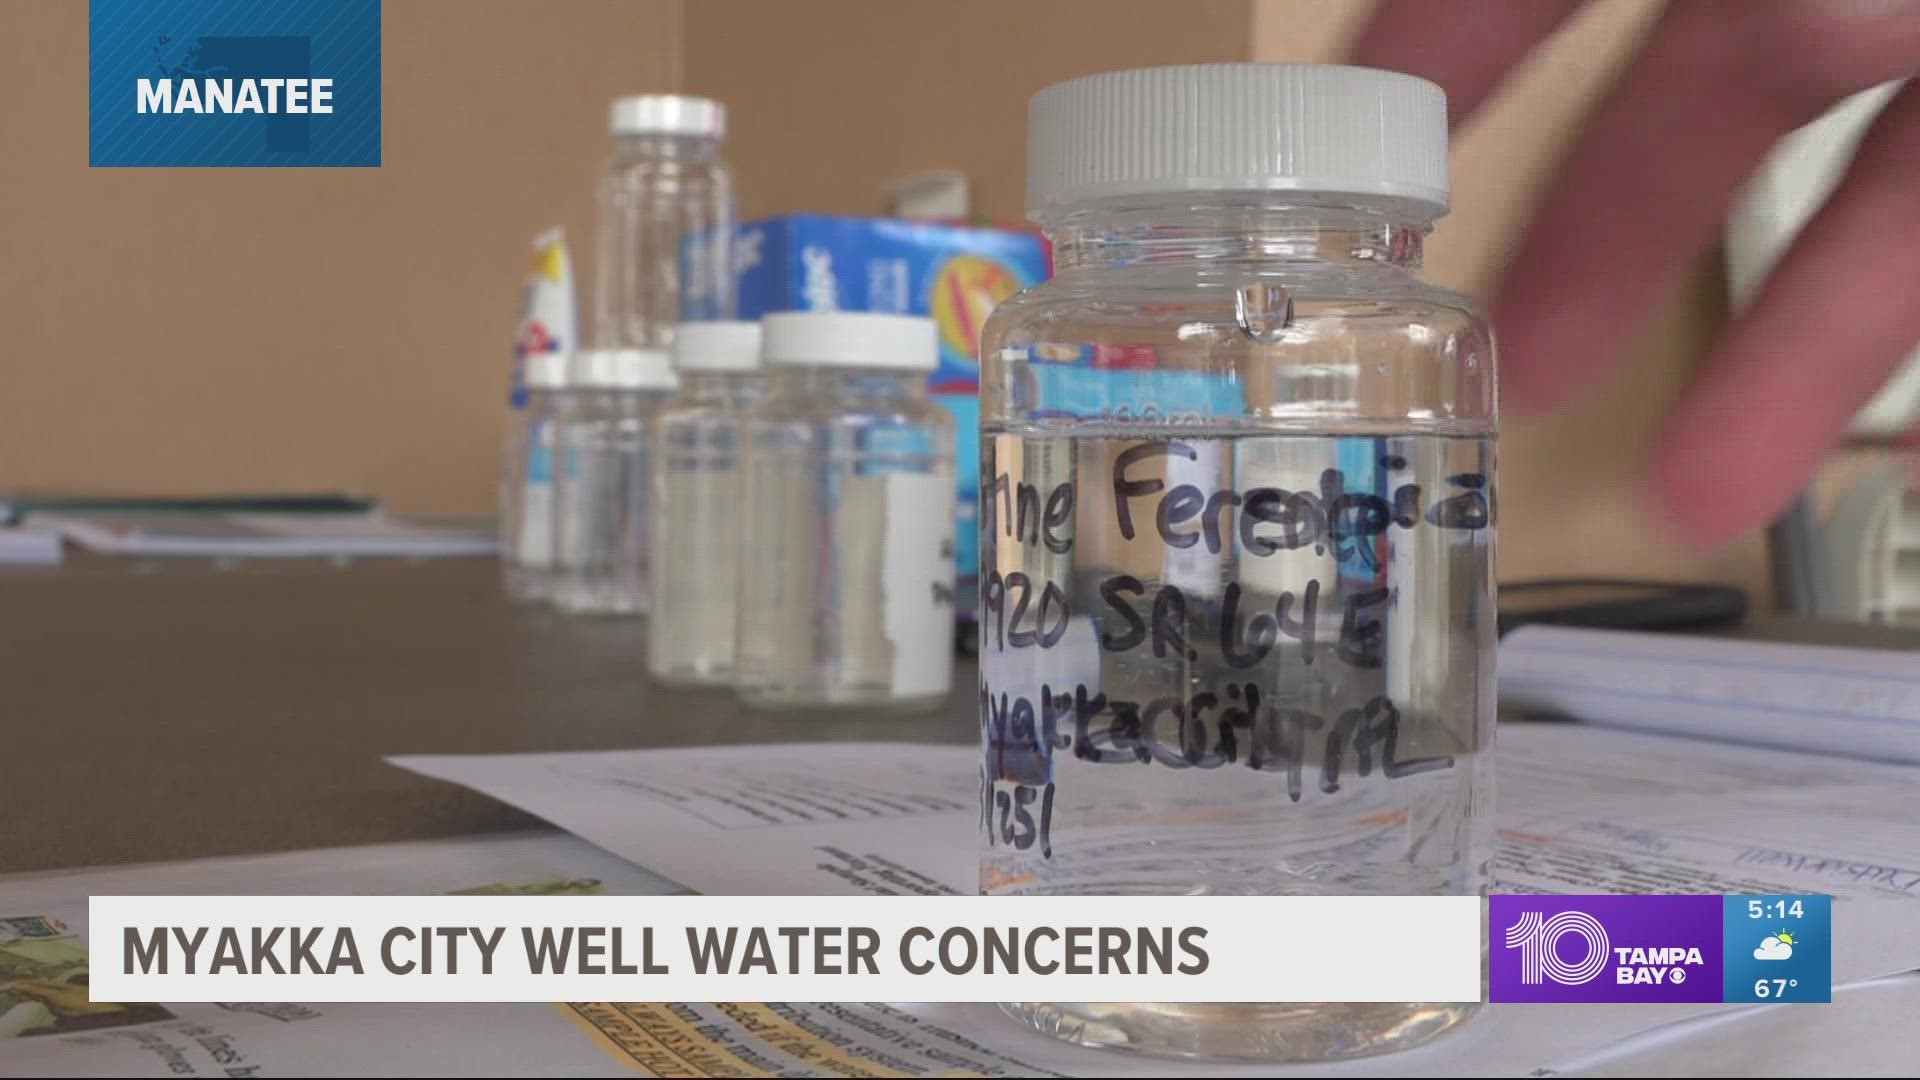 Manatee County is providing cases of bottled water and jugs of chlorine after about half of the sampled wells tested for bacteria contamination.